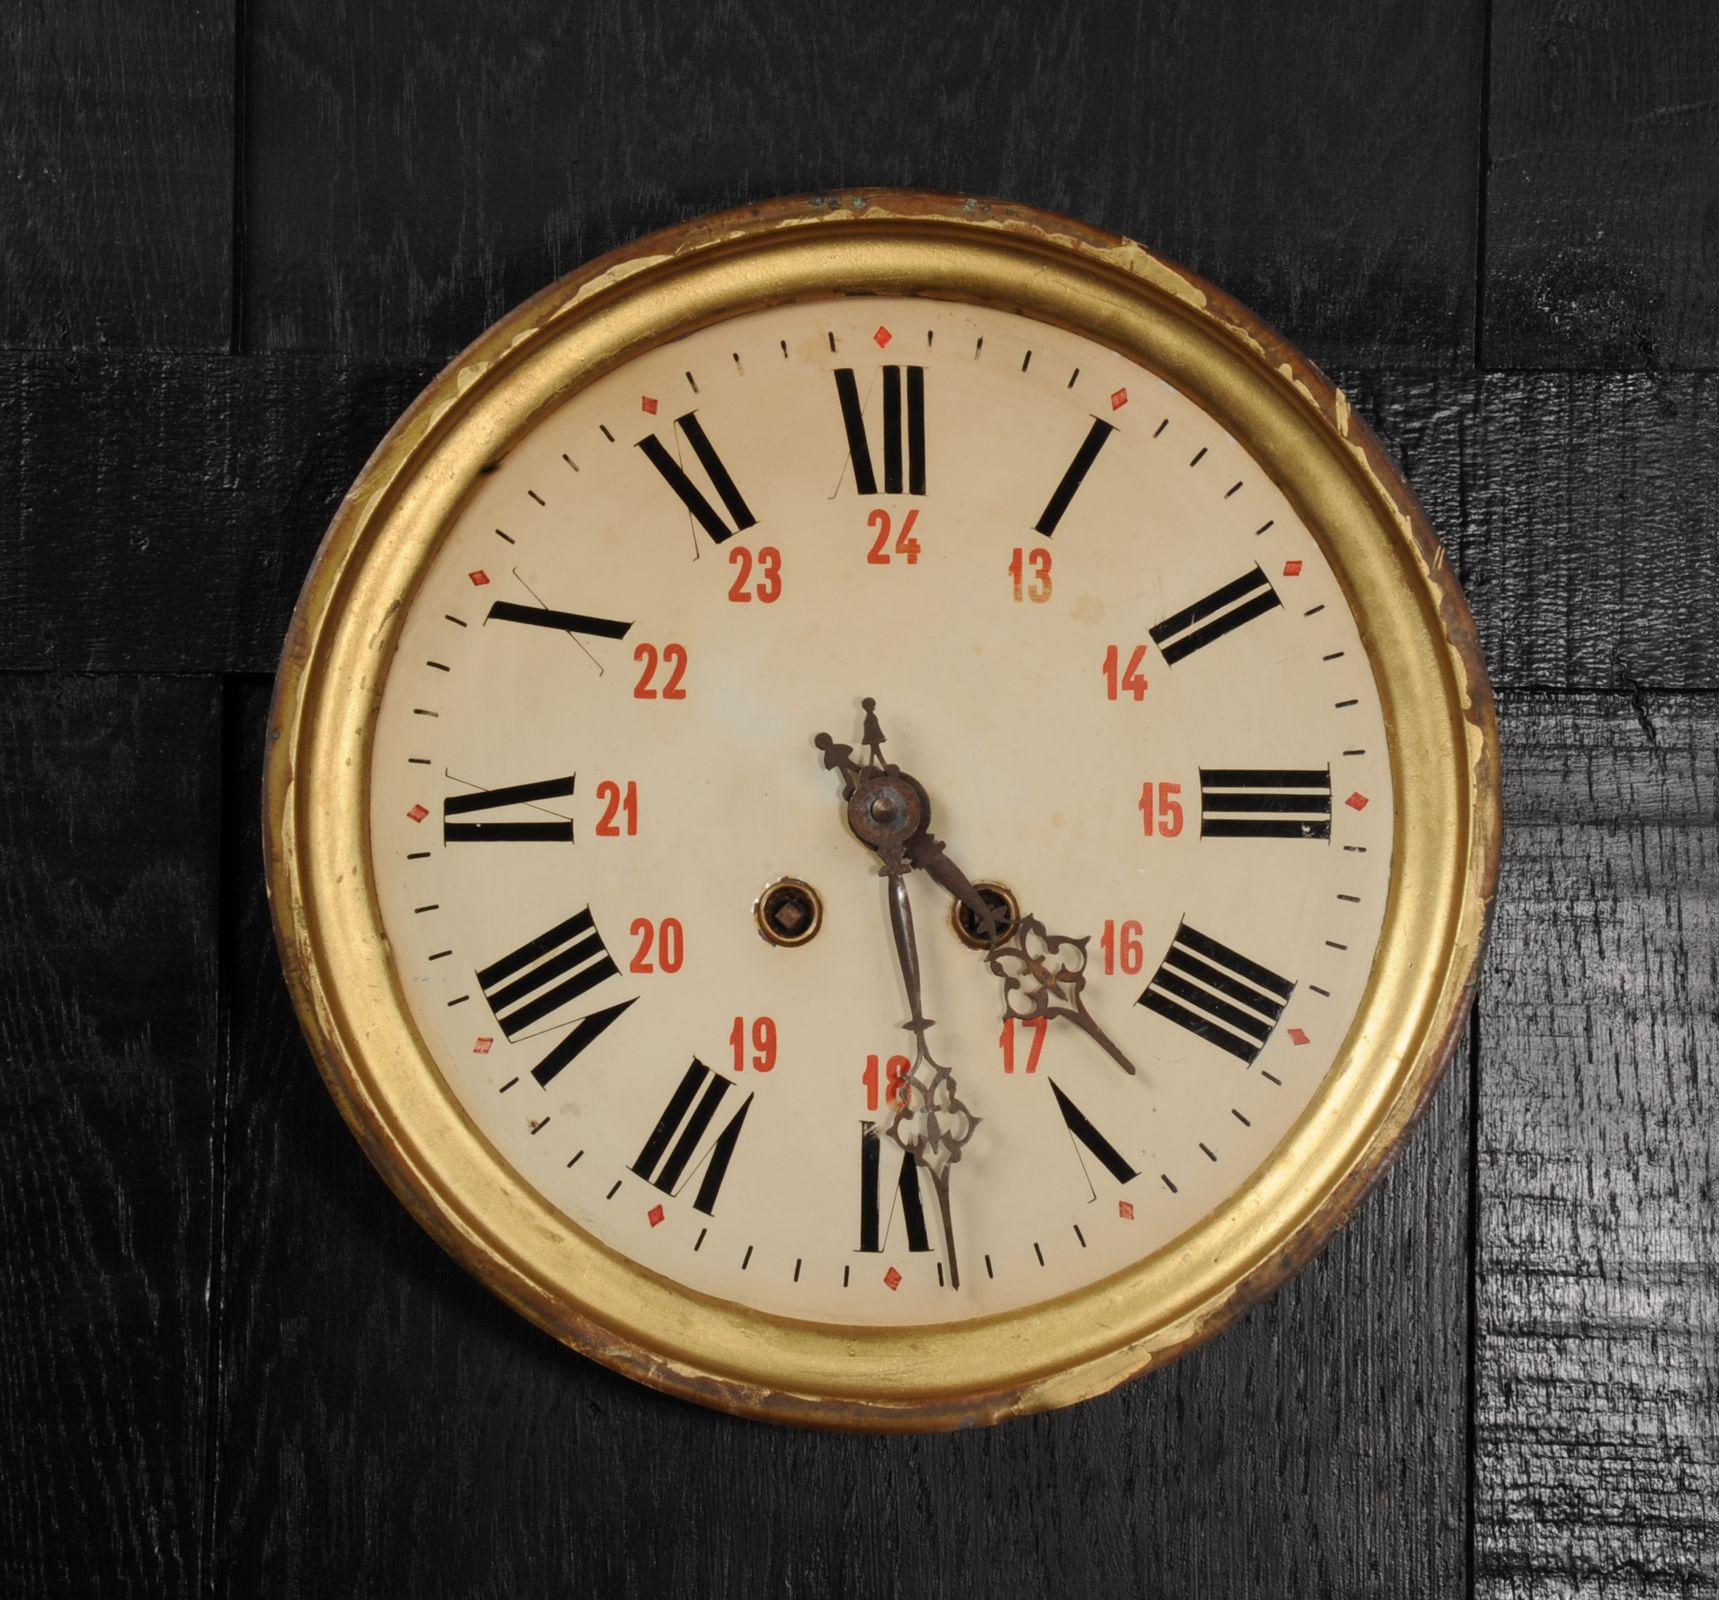 A lovely painted metal clock dial with original hands by Japy Freres. Reclaimed from a derelict French Industrial building, it bares the scars of a hard life with flaking paint, marks and rust. Originally a mechanical movement by the famed maker